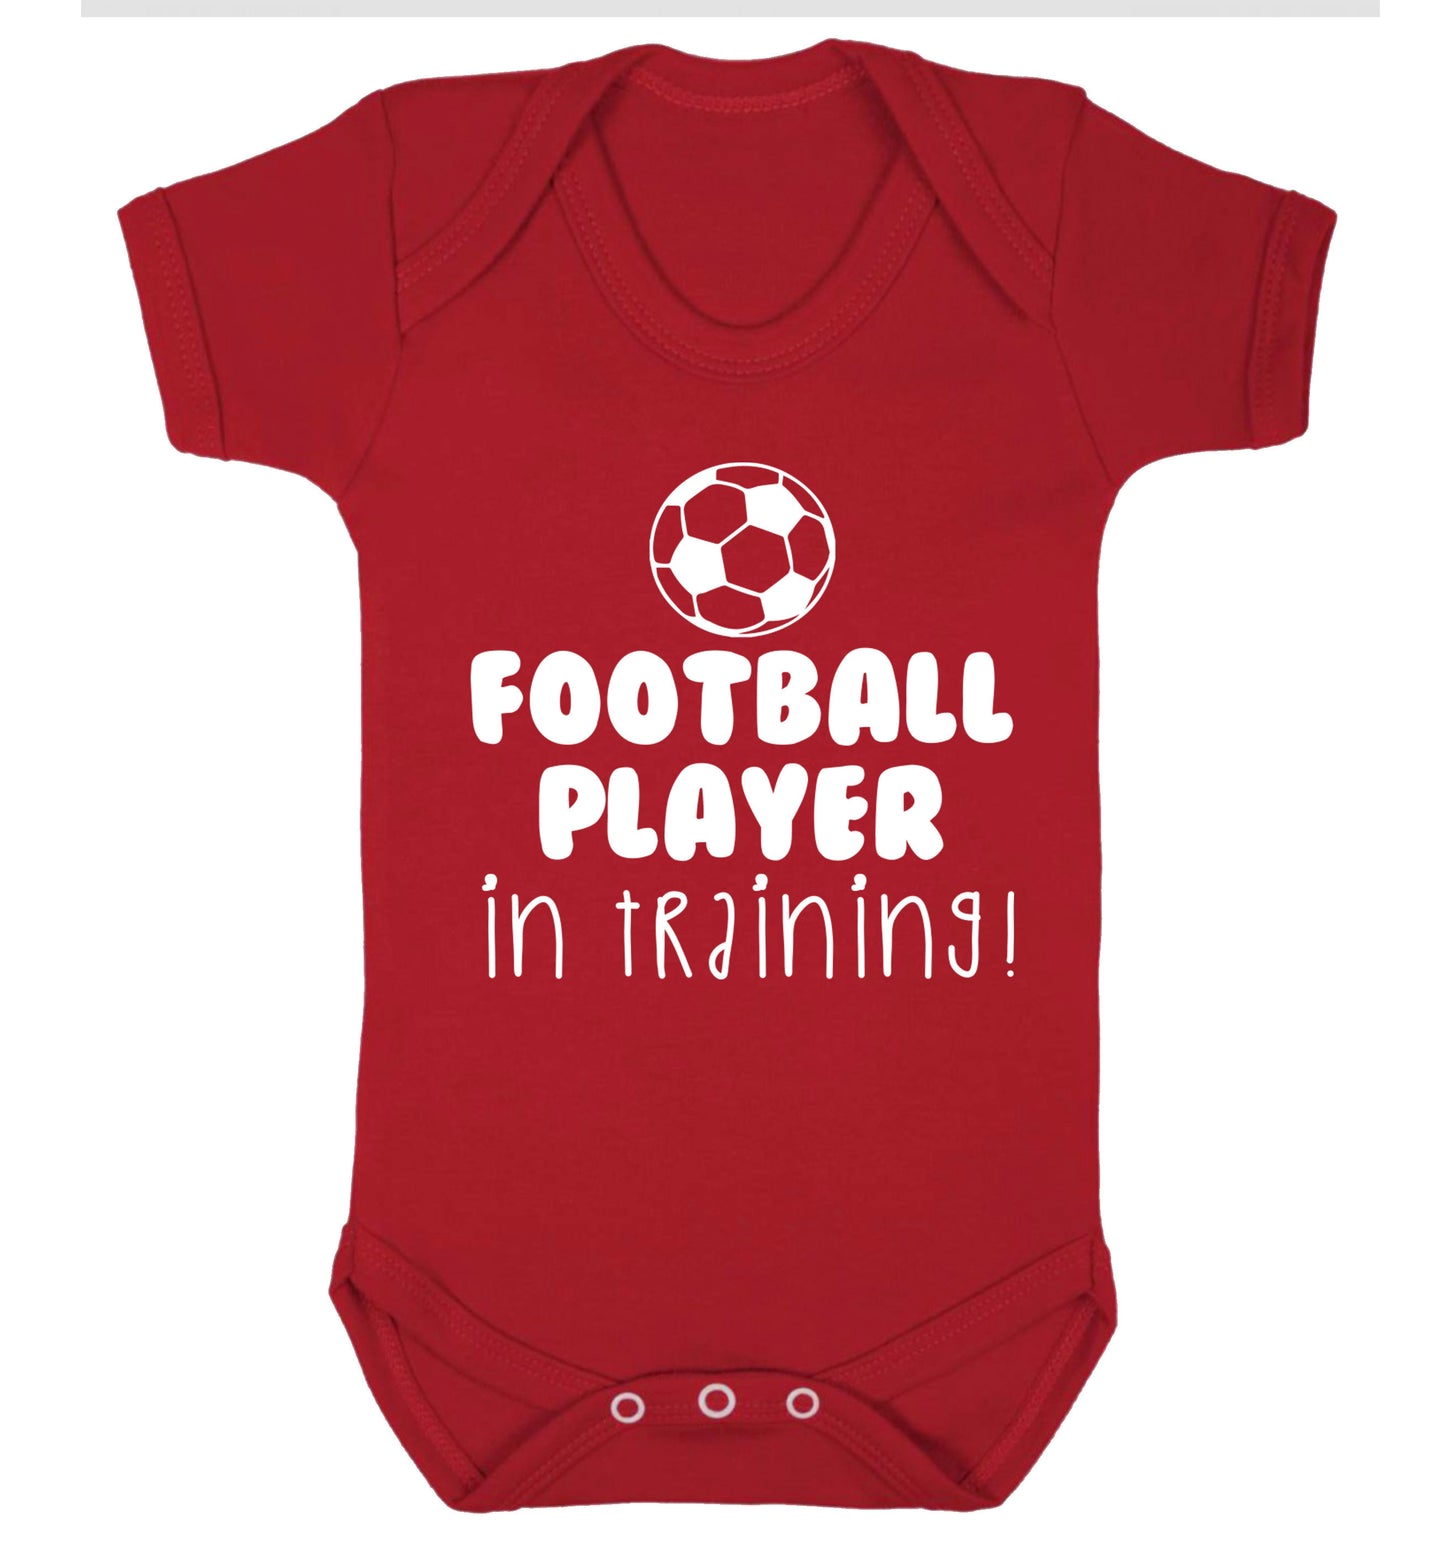 Football player in training Baby Vest red 18-24 months